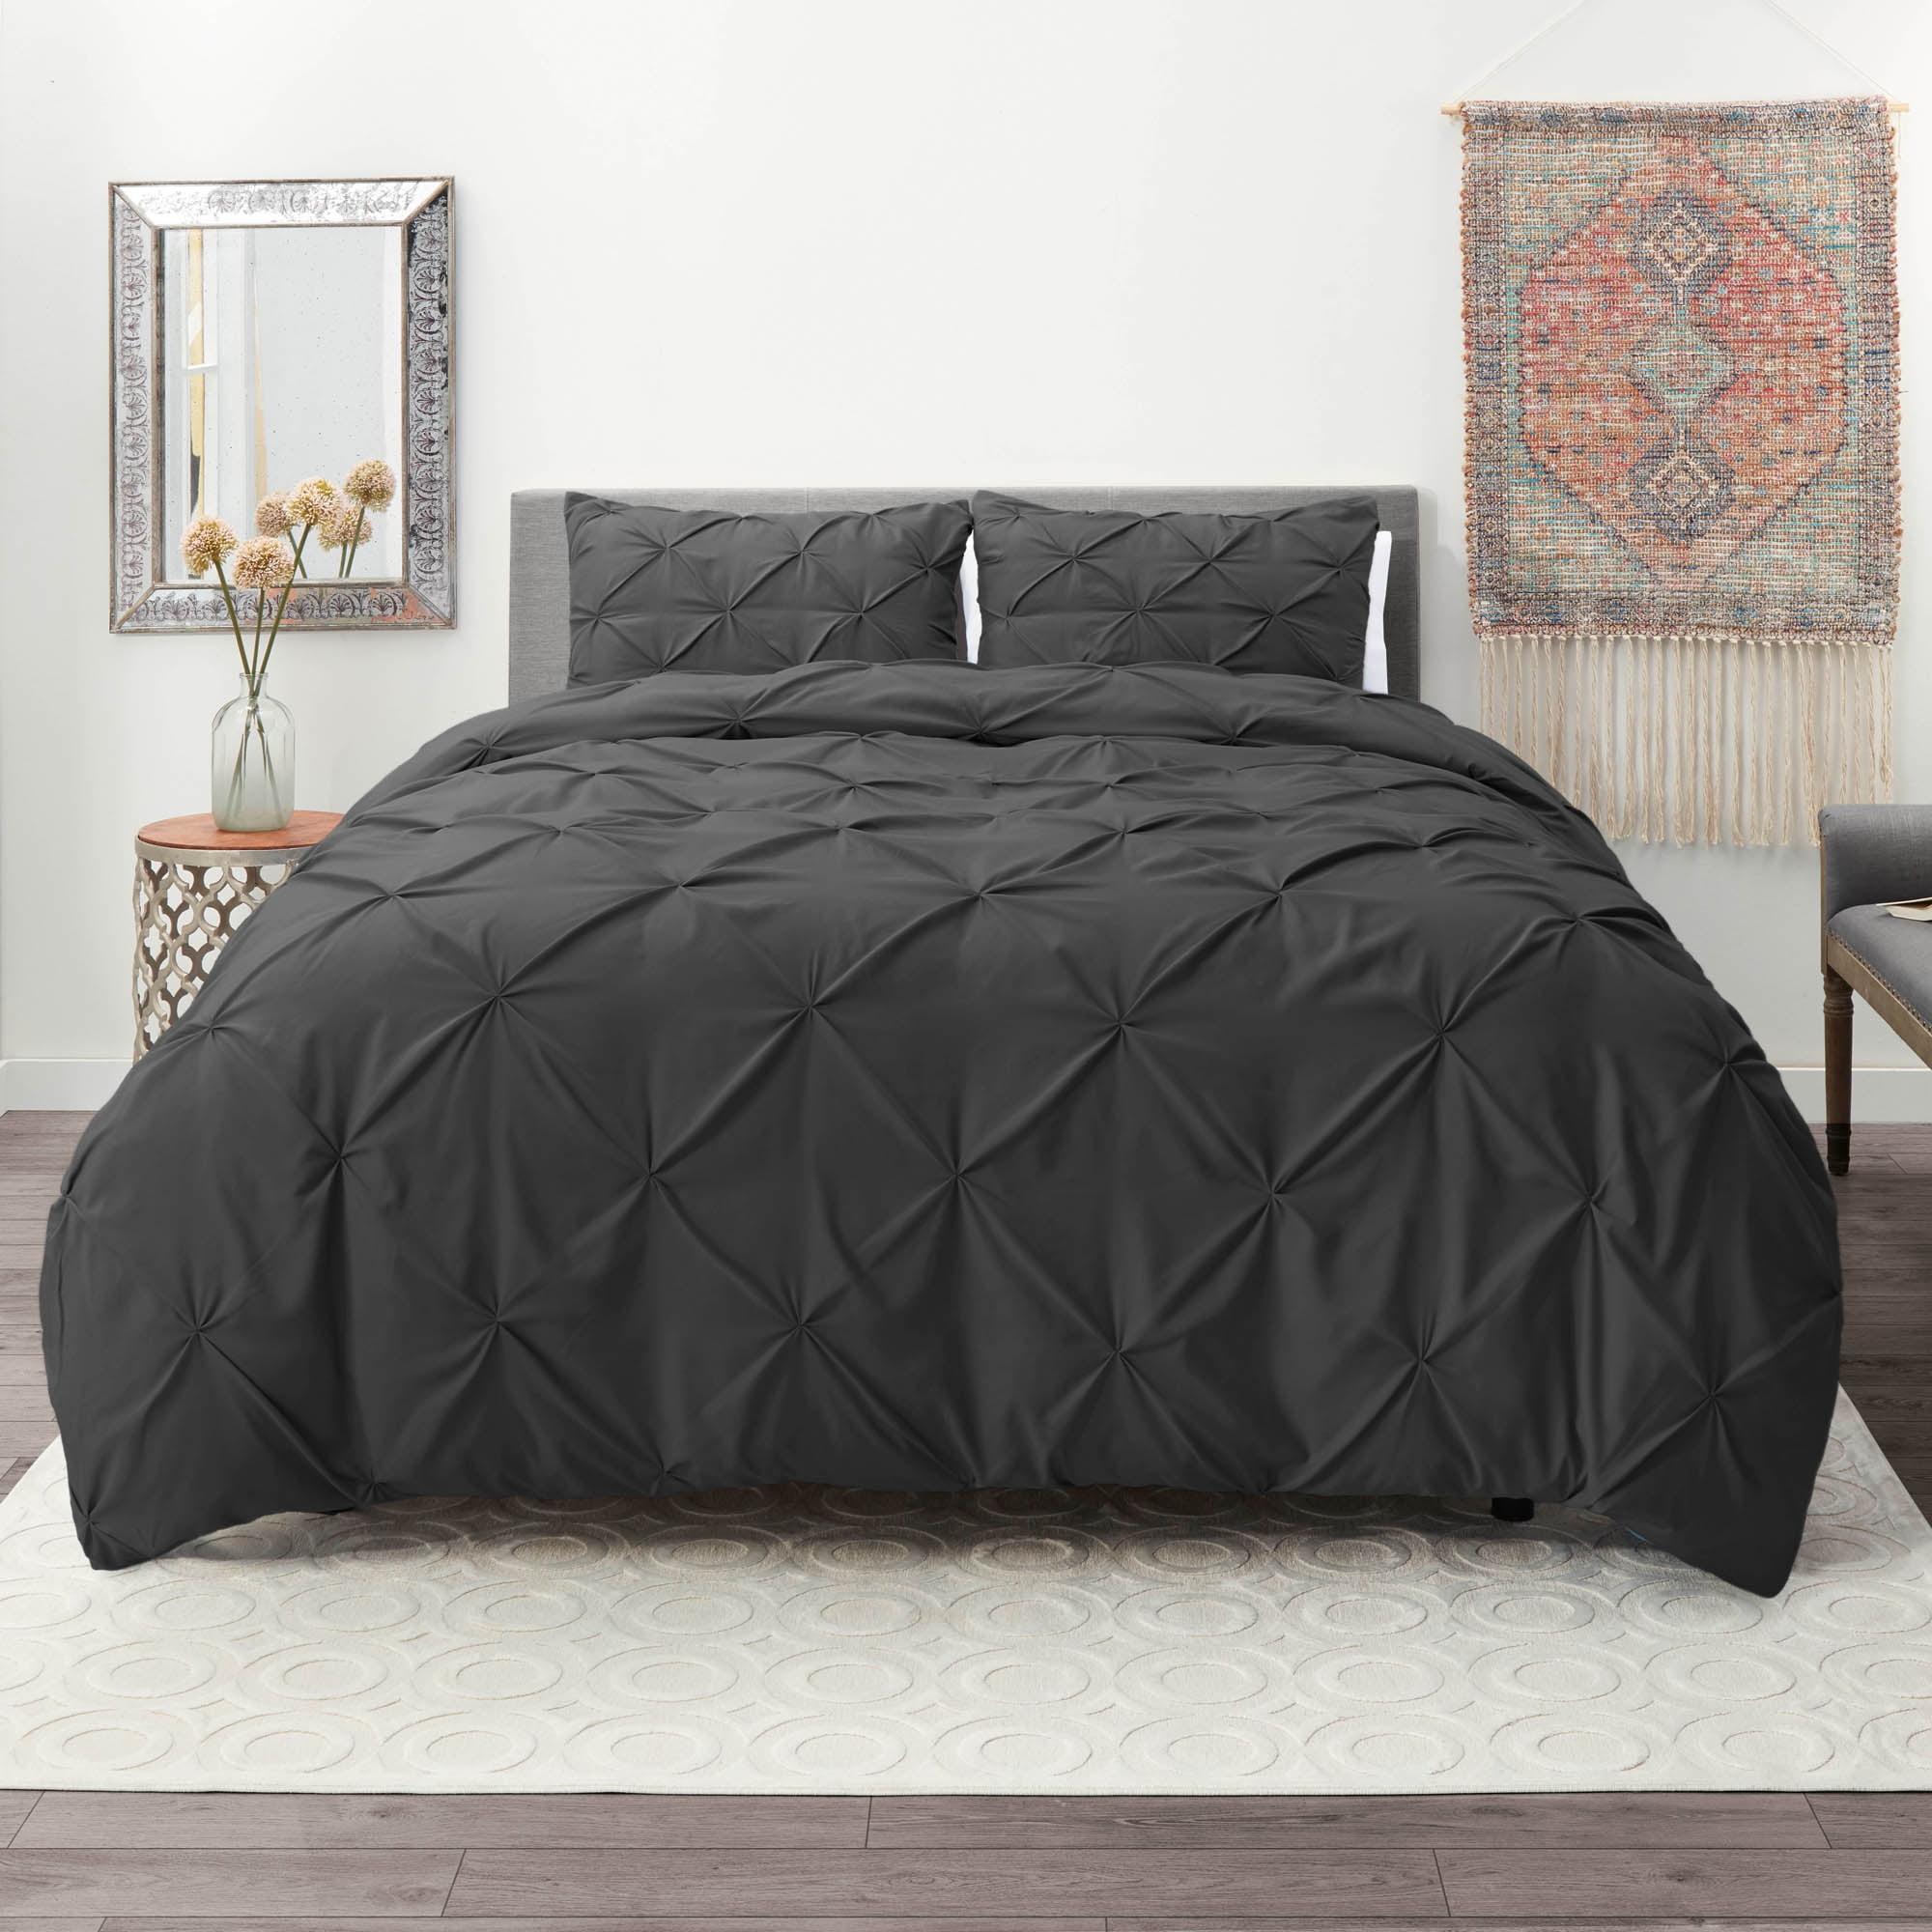 Home Collection Premium Ultra Soft 3 Piece Pinch Pleat Duvet Cover Set, King/California King - Gray